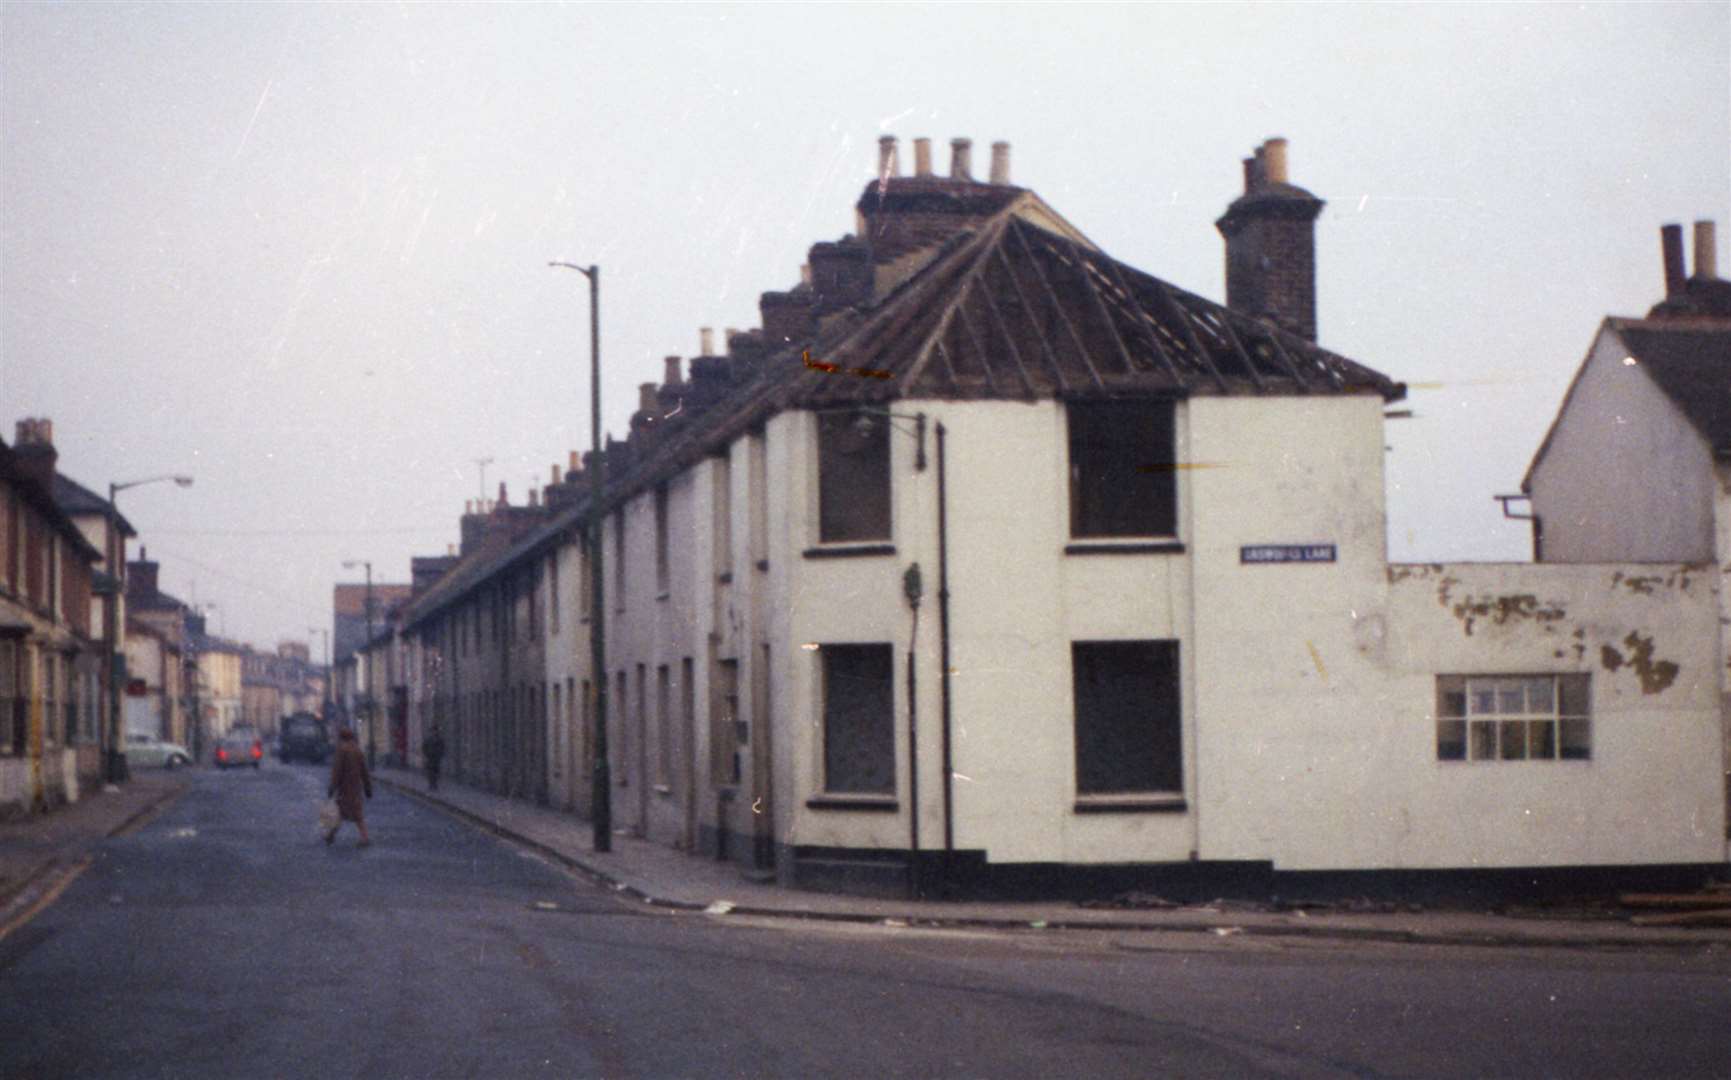 Godinton Road, looking towards Bank Street, in 1969. This rare colour view shows the ready-stripped business of Wye Fisheries at the top of Gasworks Lane. The 2008 extension to County Square covers this street today. Picture: Steve Salter